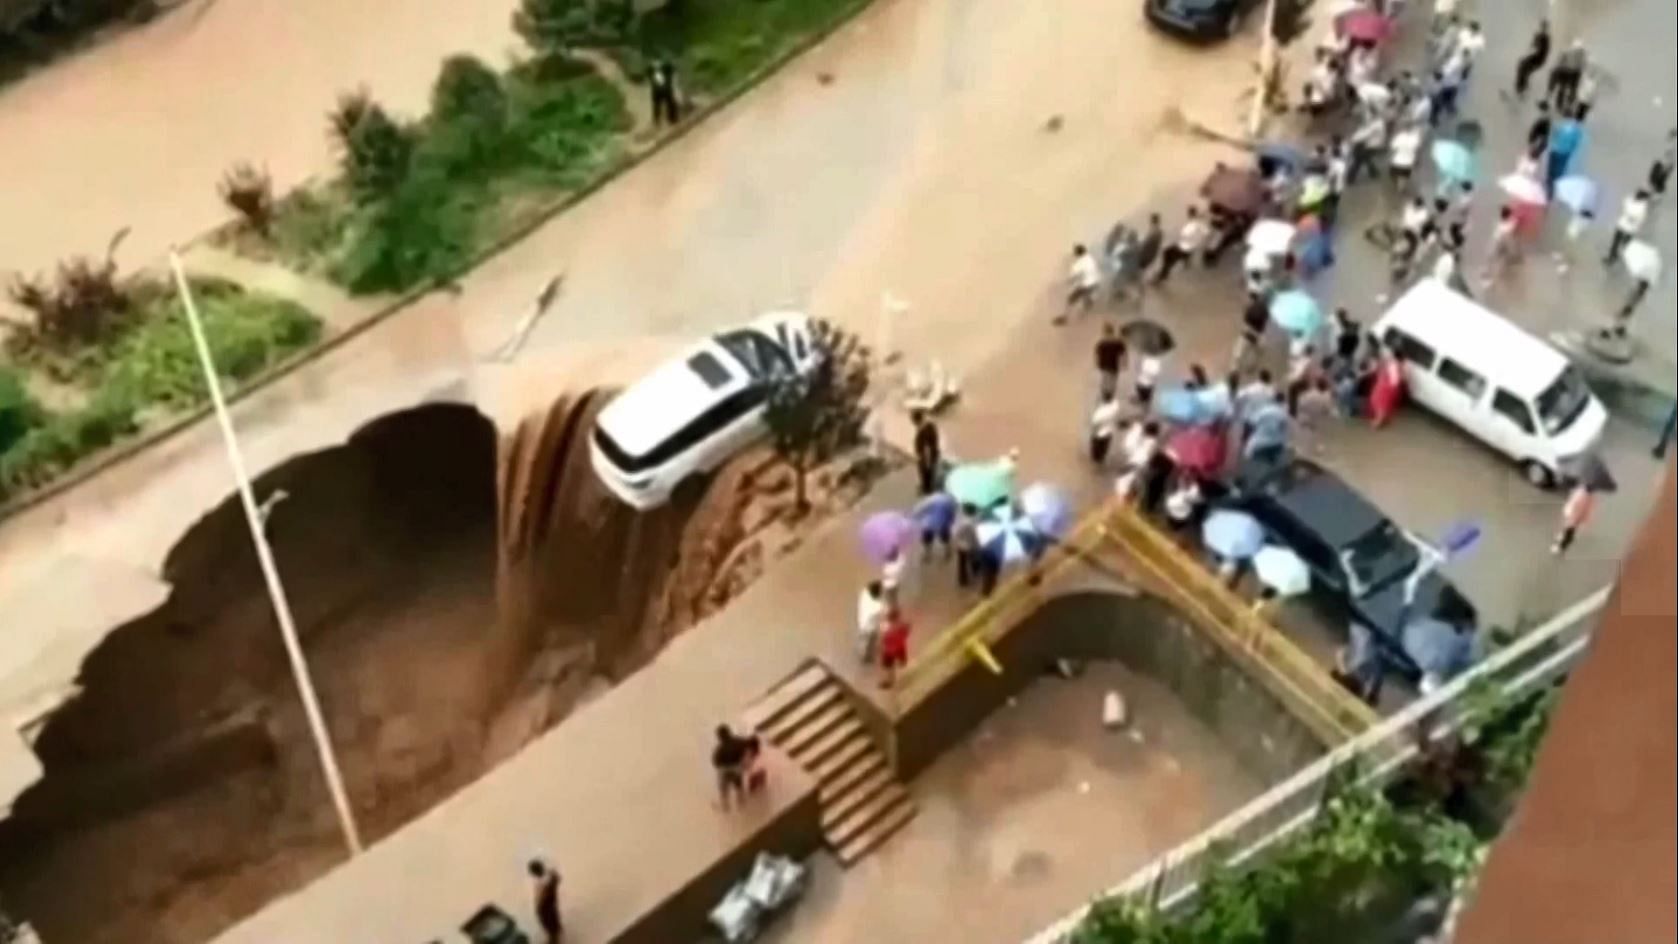 Flash floods had swept the car to the edge of the sinkhole.